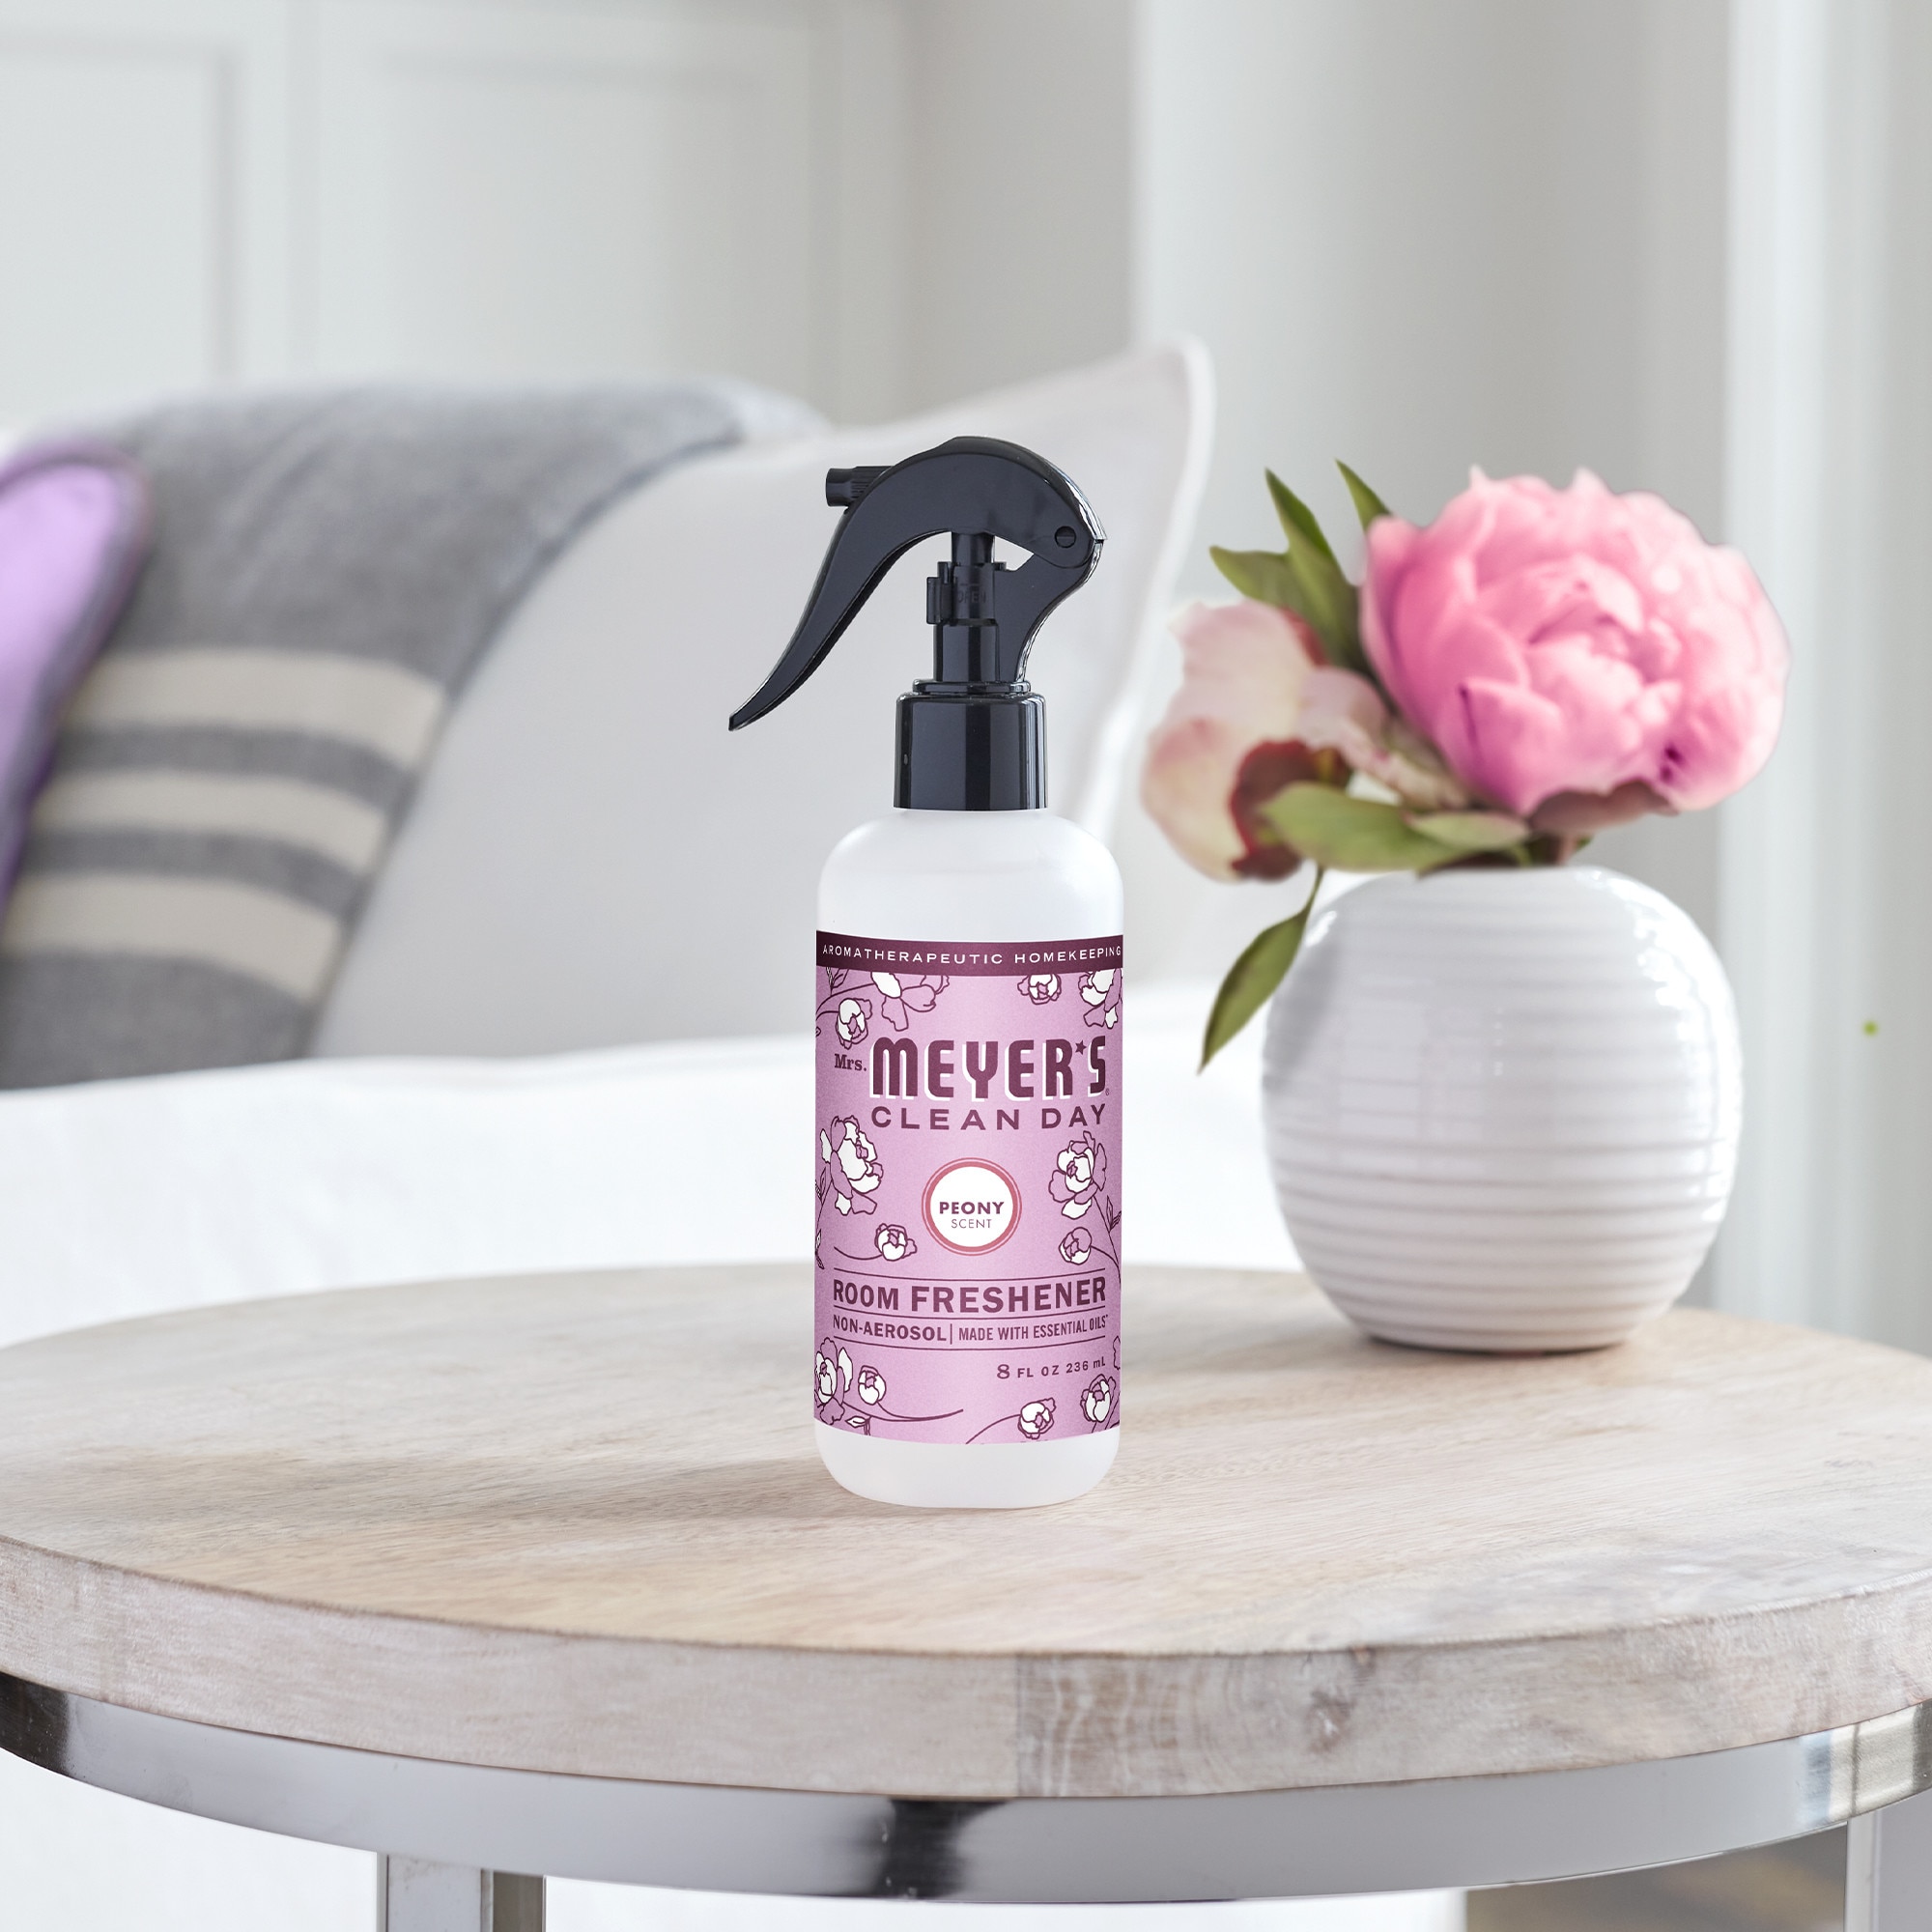 Awesome FREE Mrs. Meyer's Cleaning Products Offer - House of Hawthornes